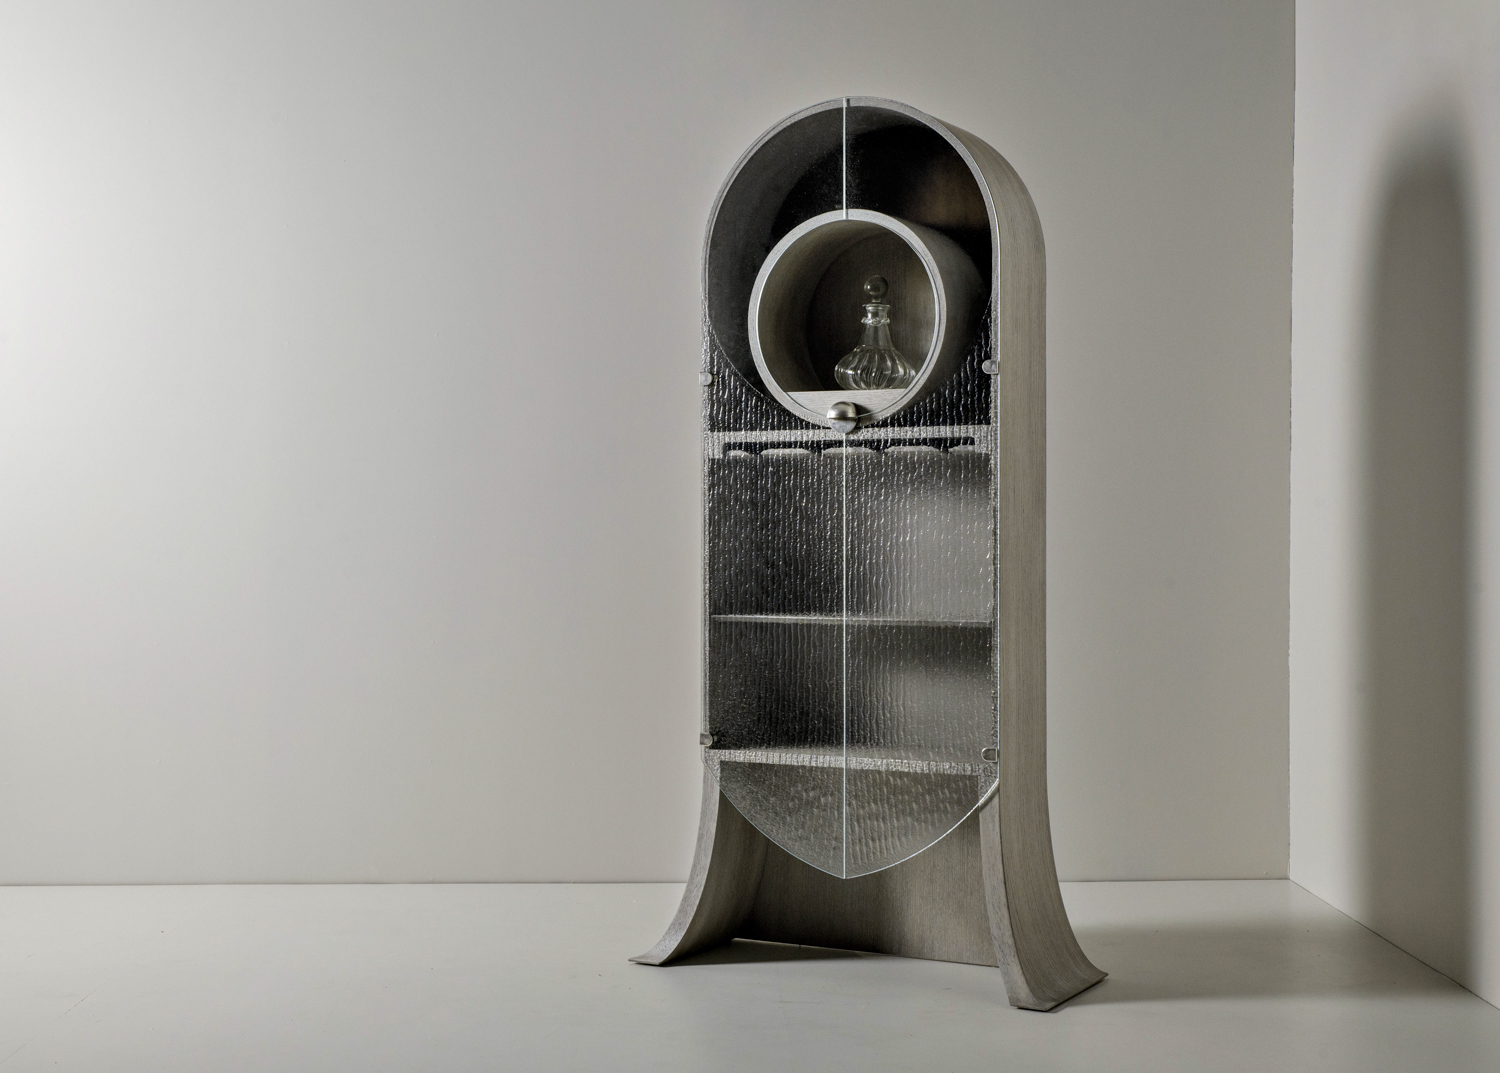 A bar cabinet by Abner Henry x the Met inspired by a Klimt painting